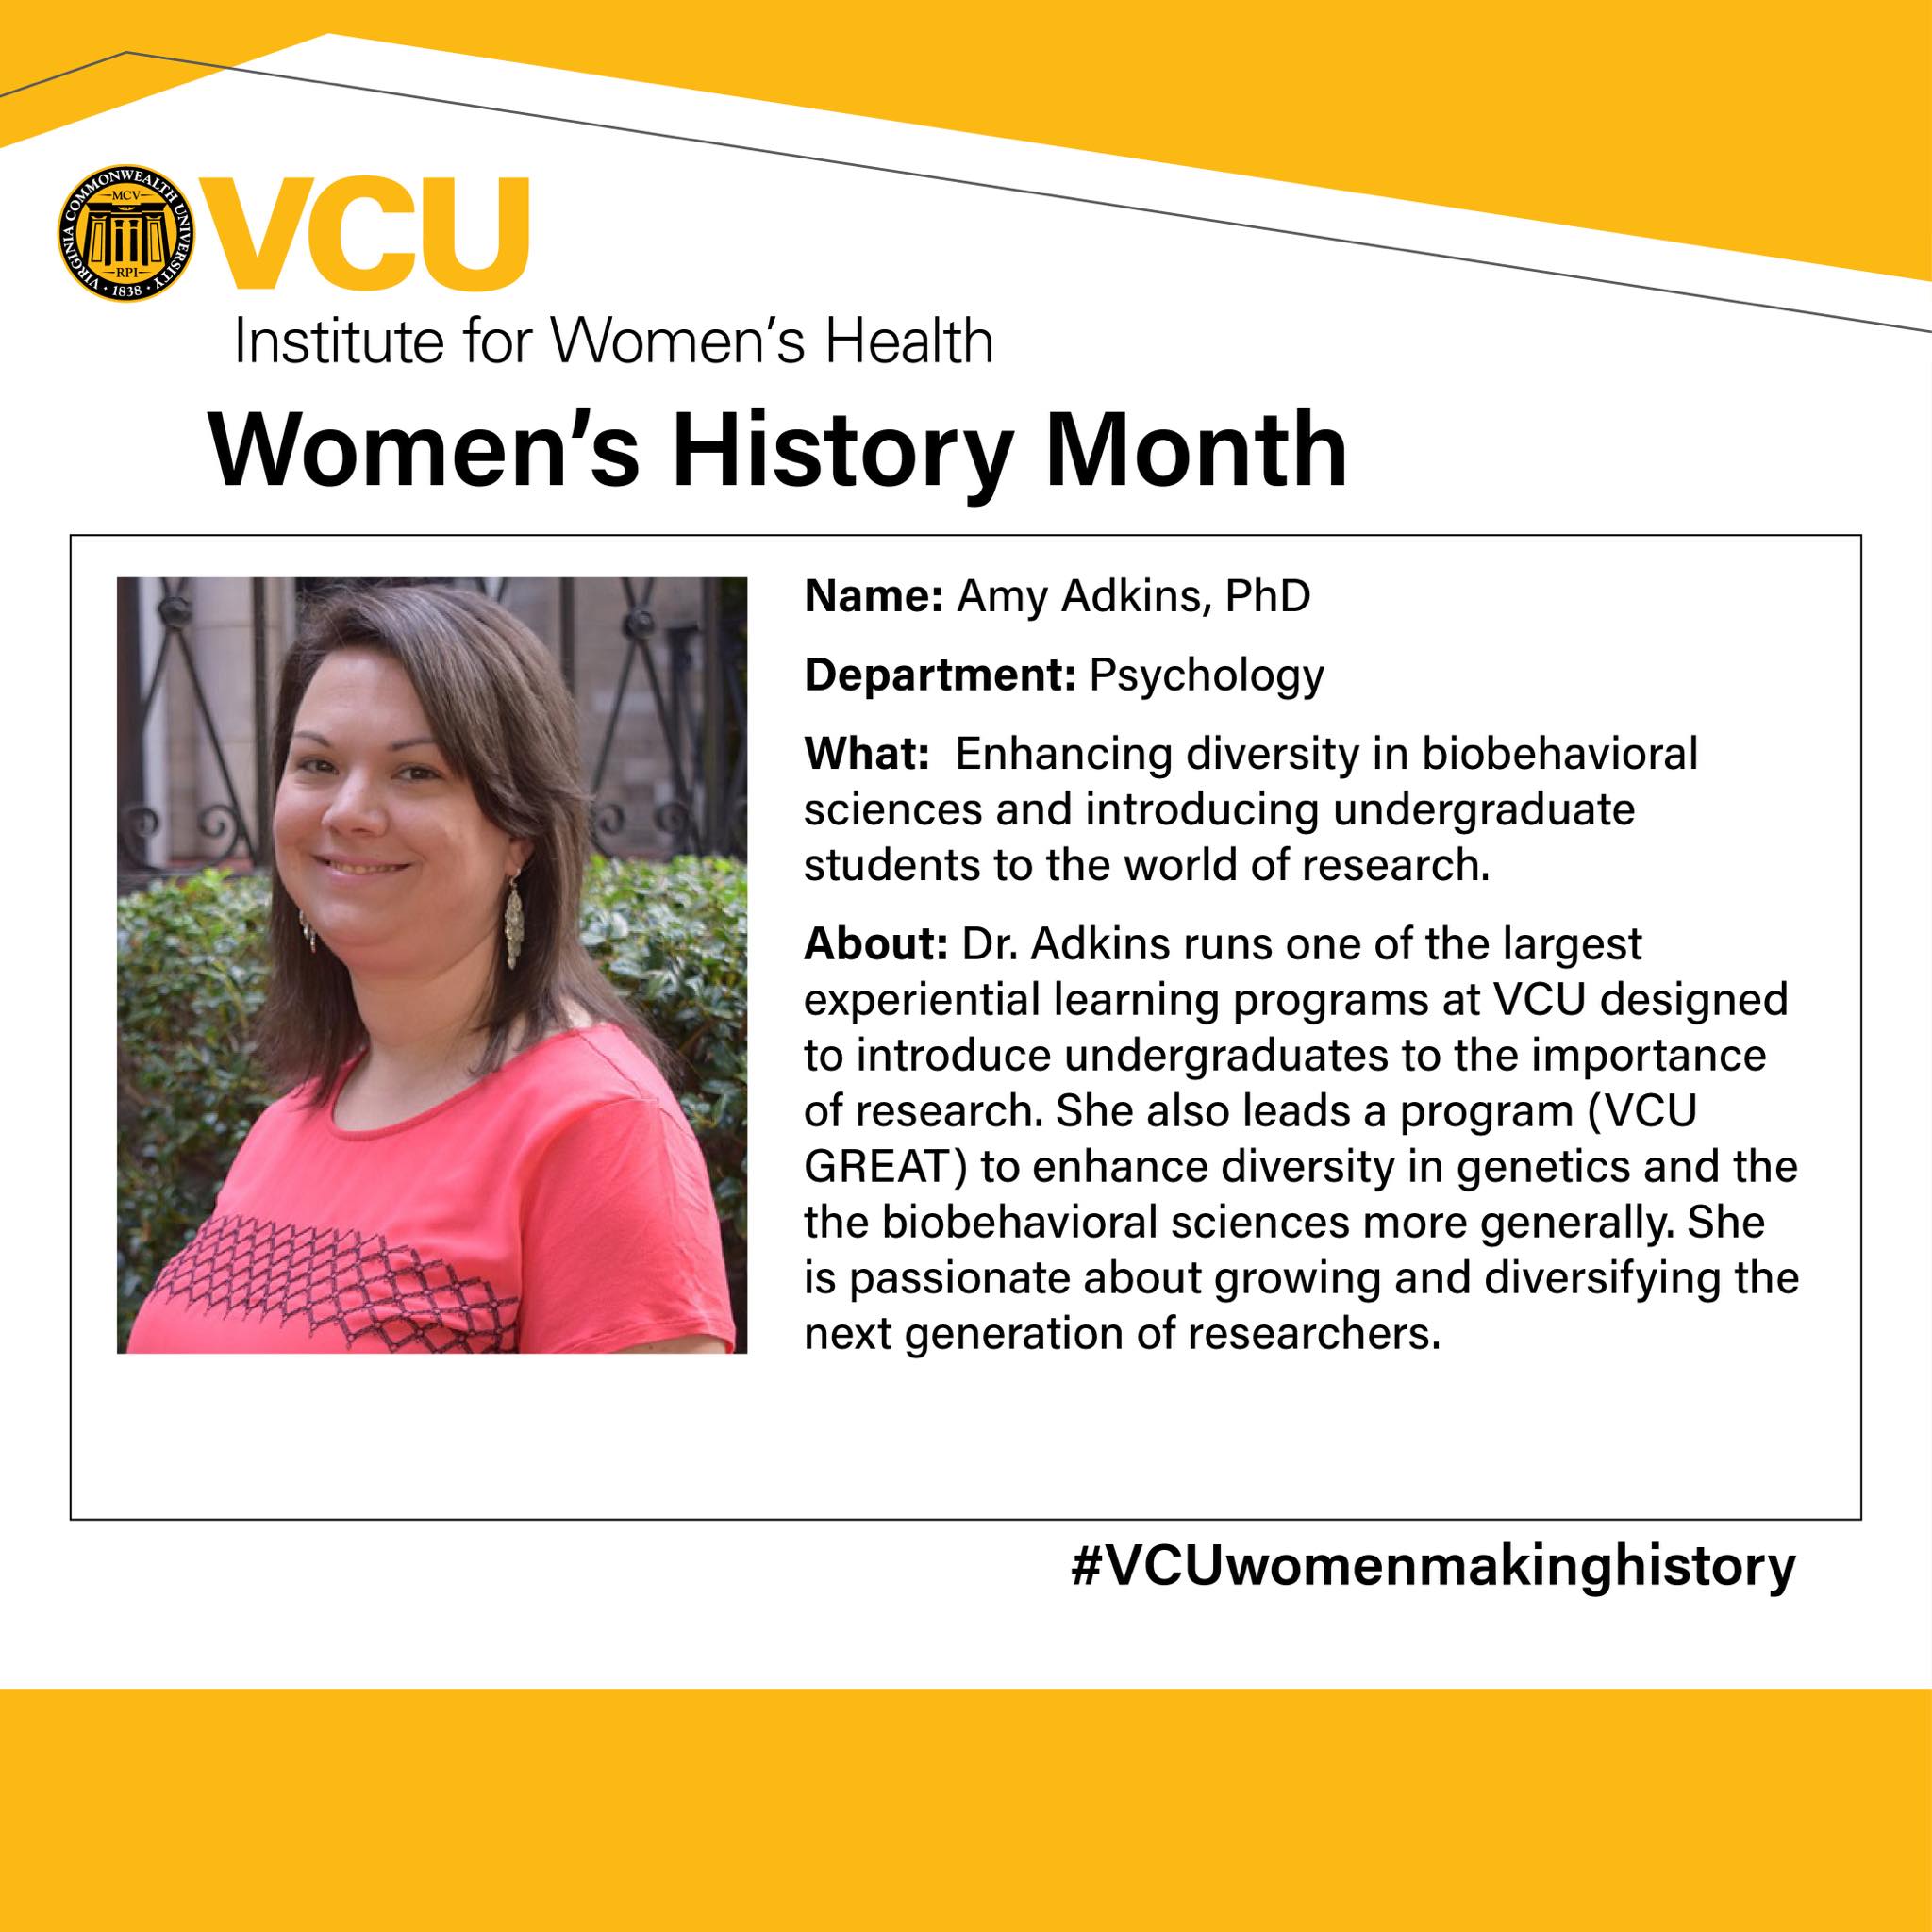 EDGE Lab's Dr. Amy Adkins Named to VCU Women Making History